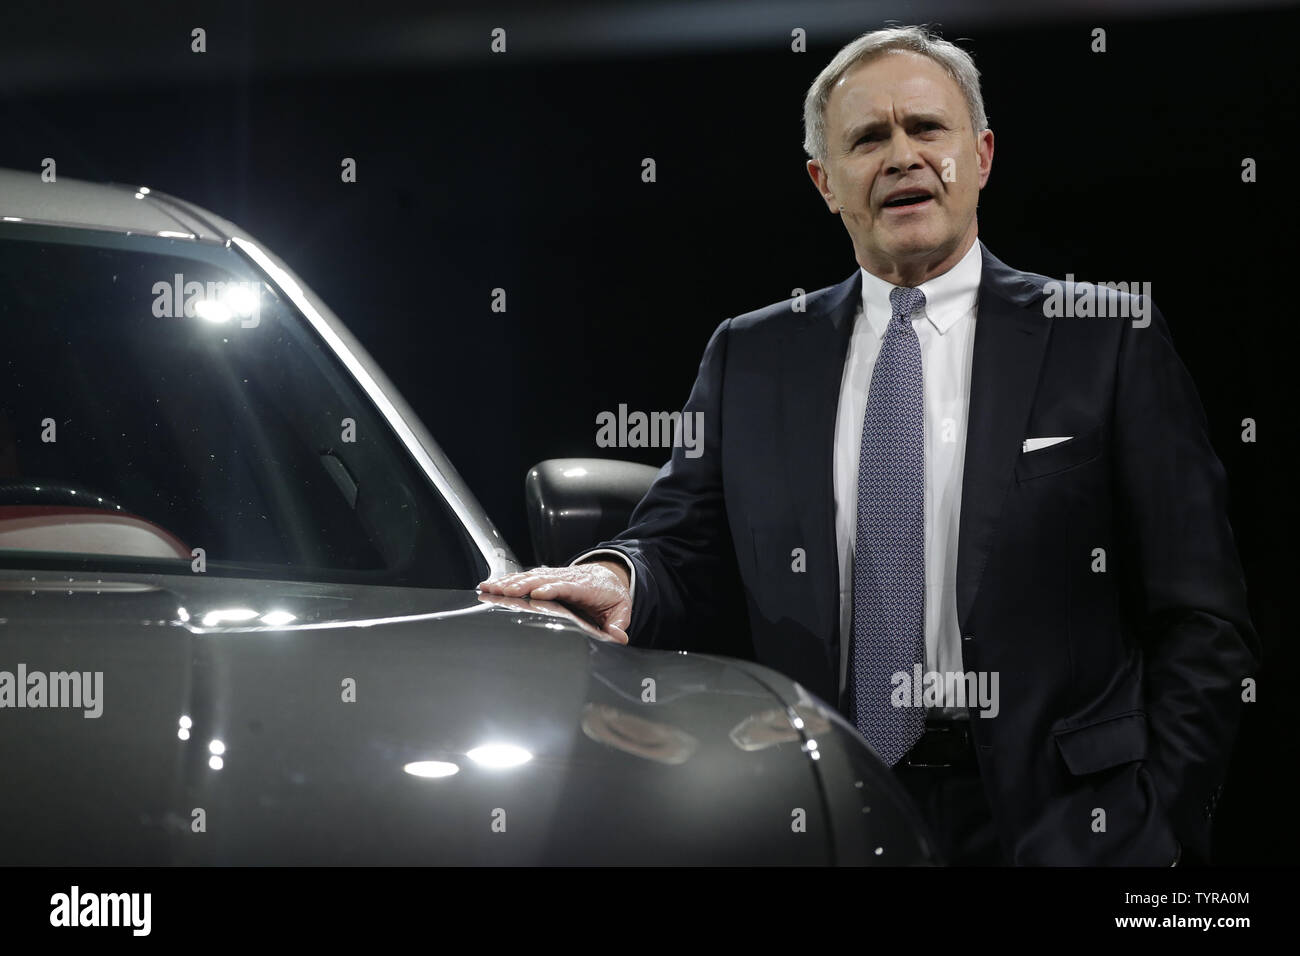 Maserati CEO Harald J. Wester unveils the 2017 Maserati Levante SUV at the  2016 New York International Auto Show at the Jacob K. Javits Convention  Center in New York City on March